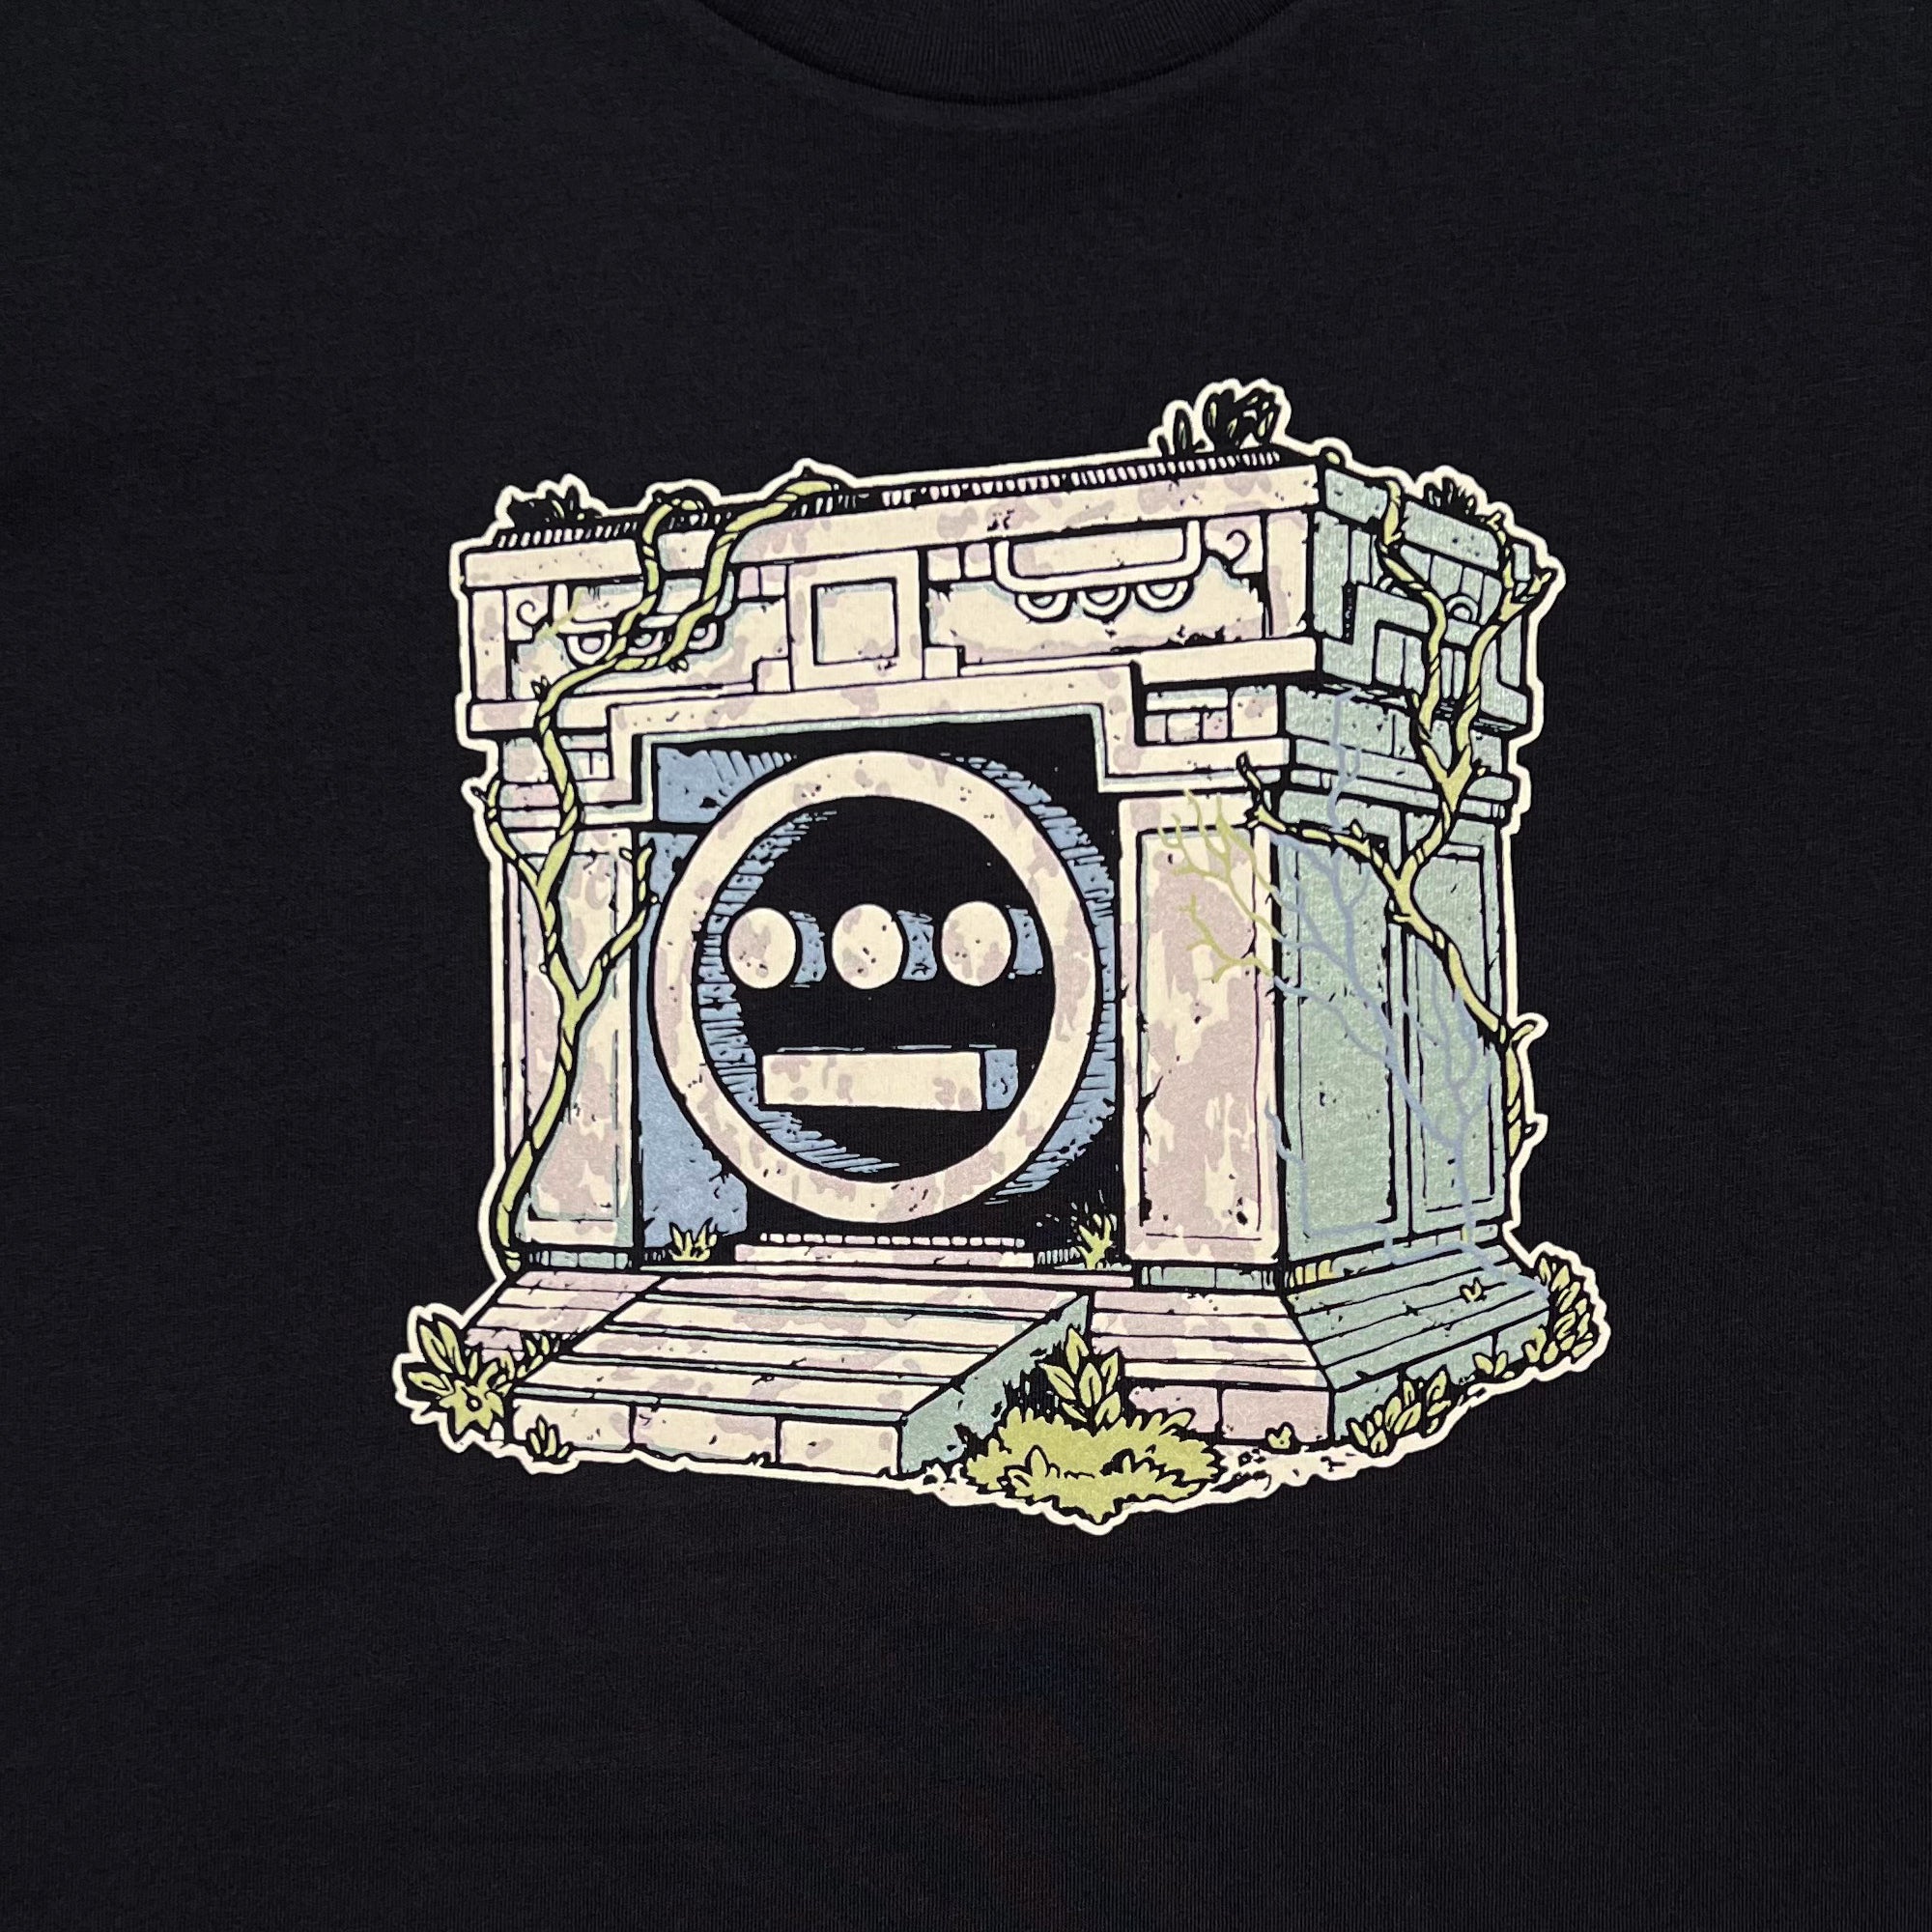 Detailed close of a graphic illustration of a crypt with the Hiero hip-hop logo in the center on a black t-shirt.